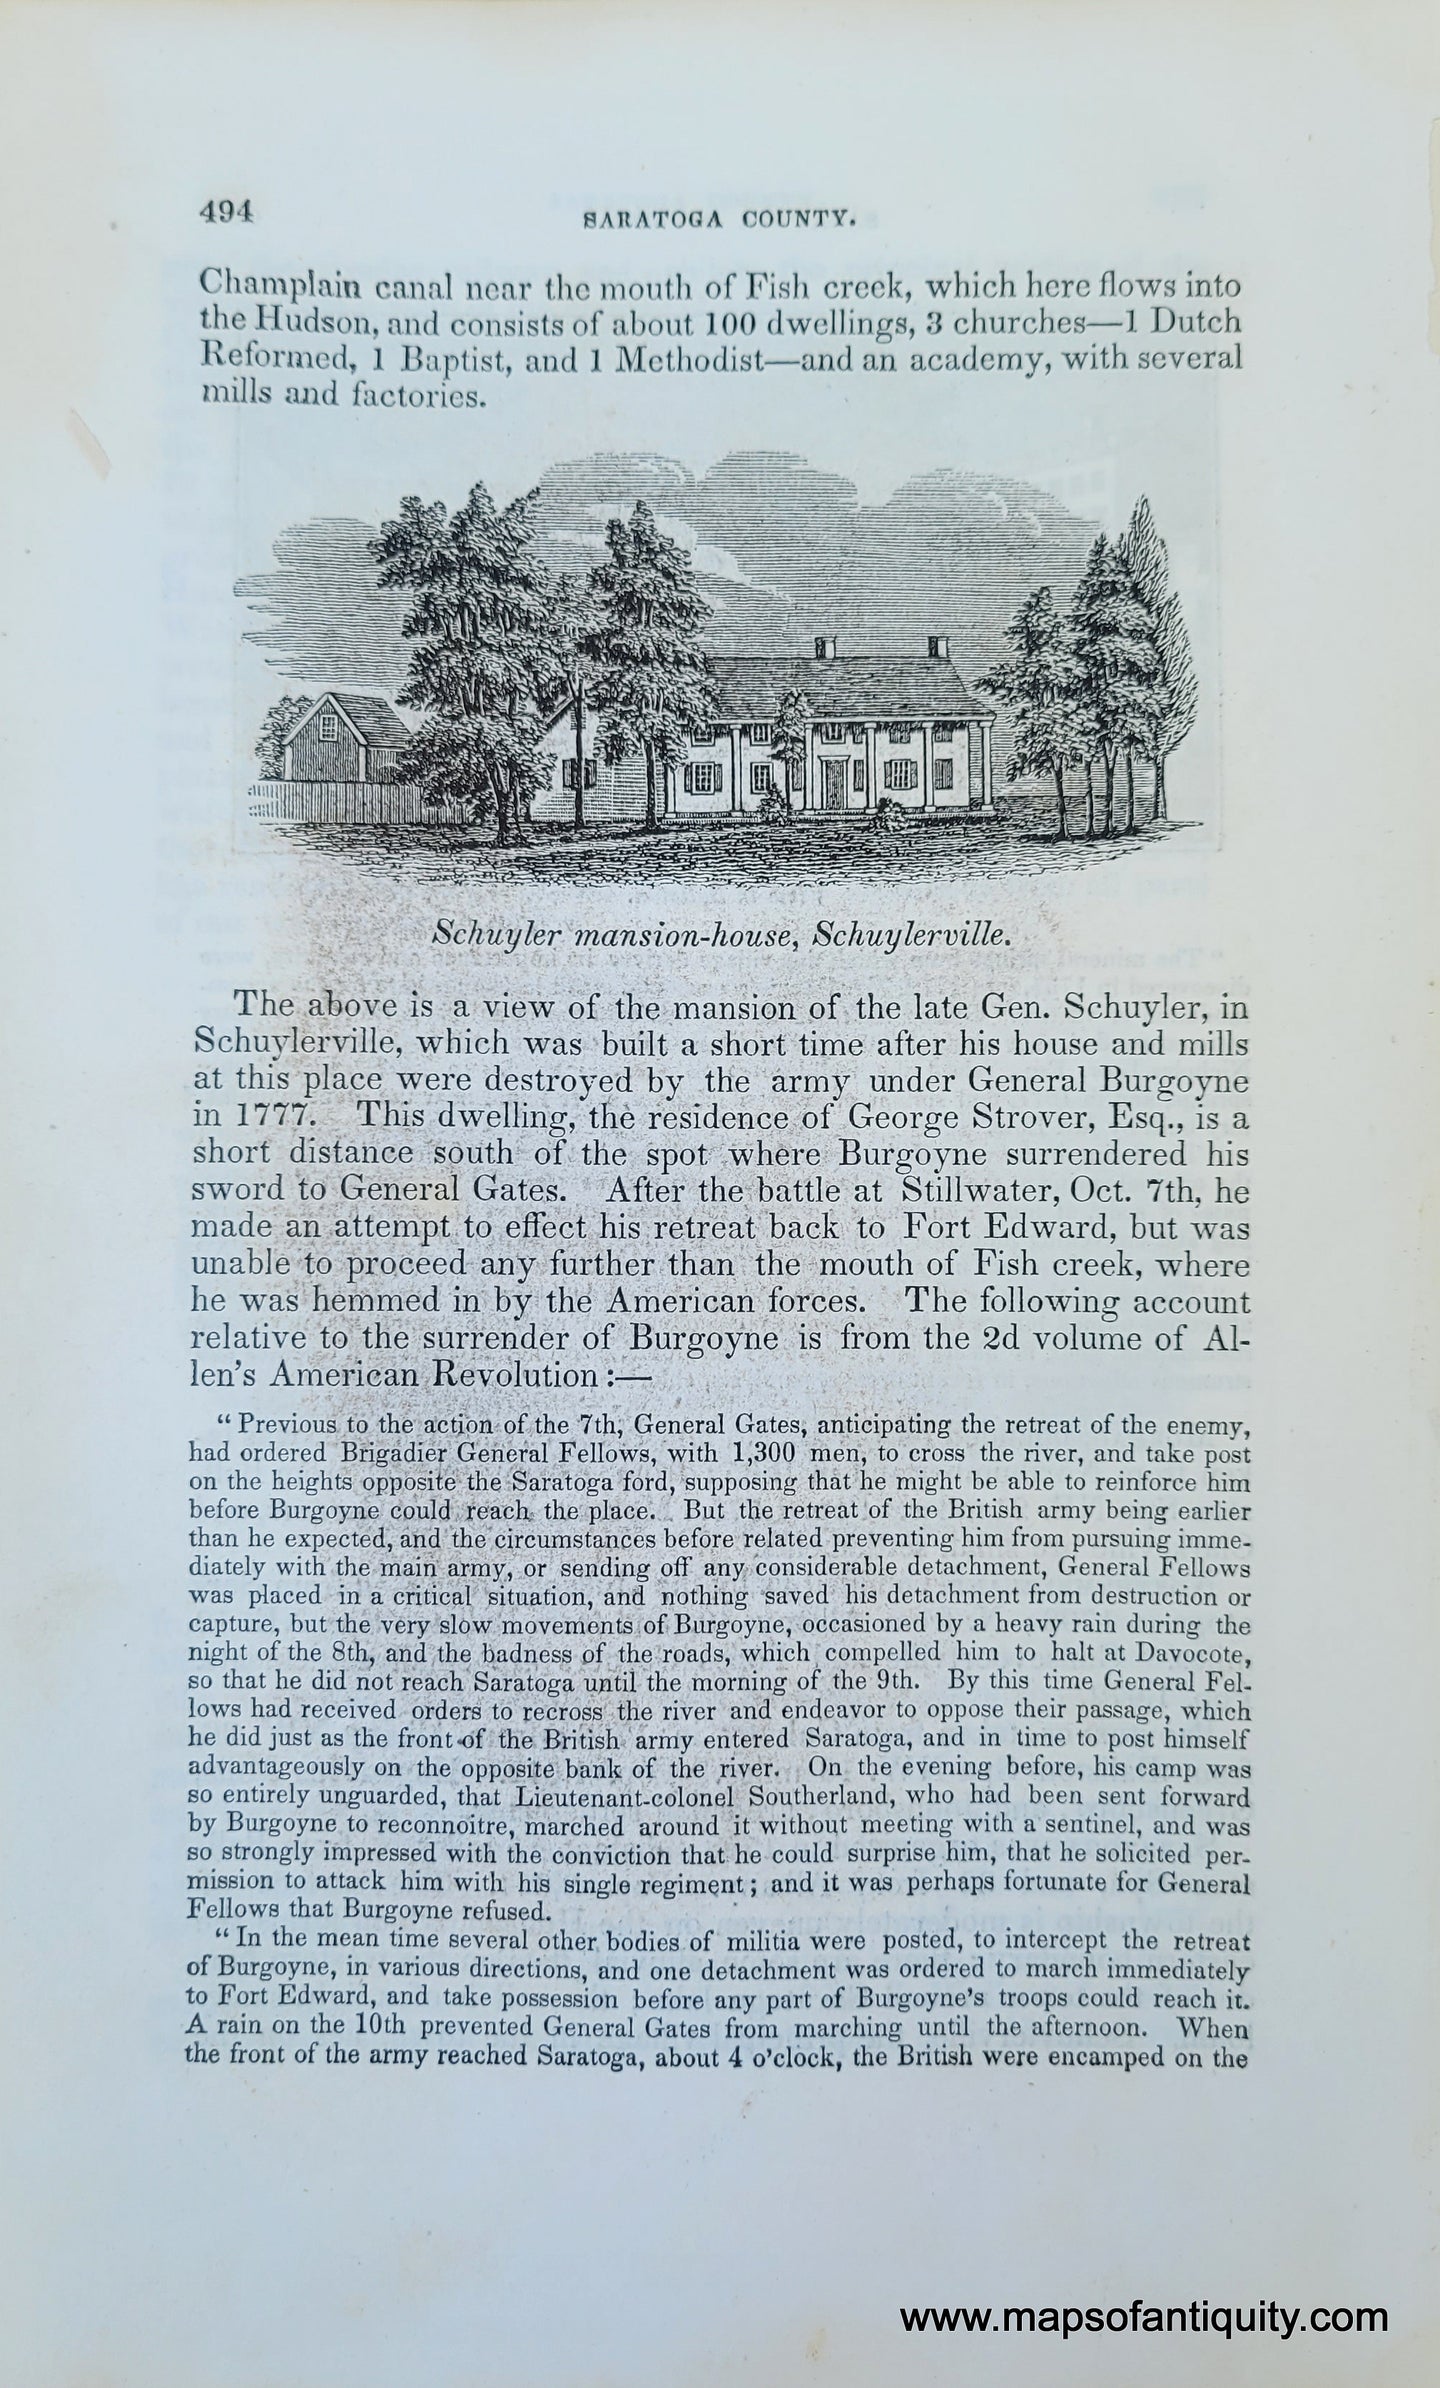 Genuine-Antique-Illustration-Schuyler-mansion-house,-Schuylerville-(NY)-with-verso-View-in-Ballston-(NY)-1841-Barber-Maps-Of-Antiquity